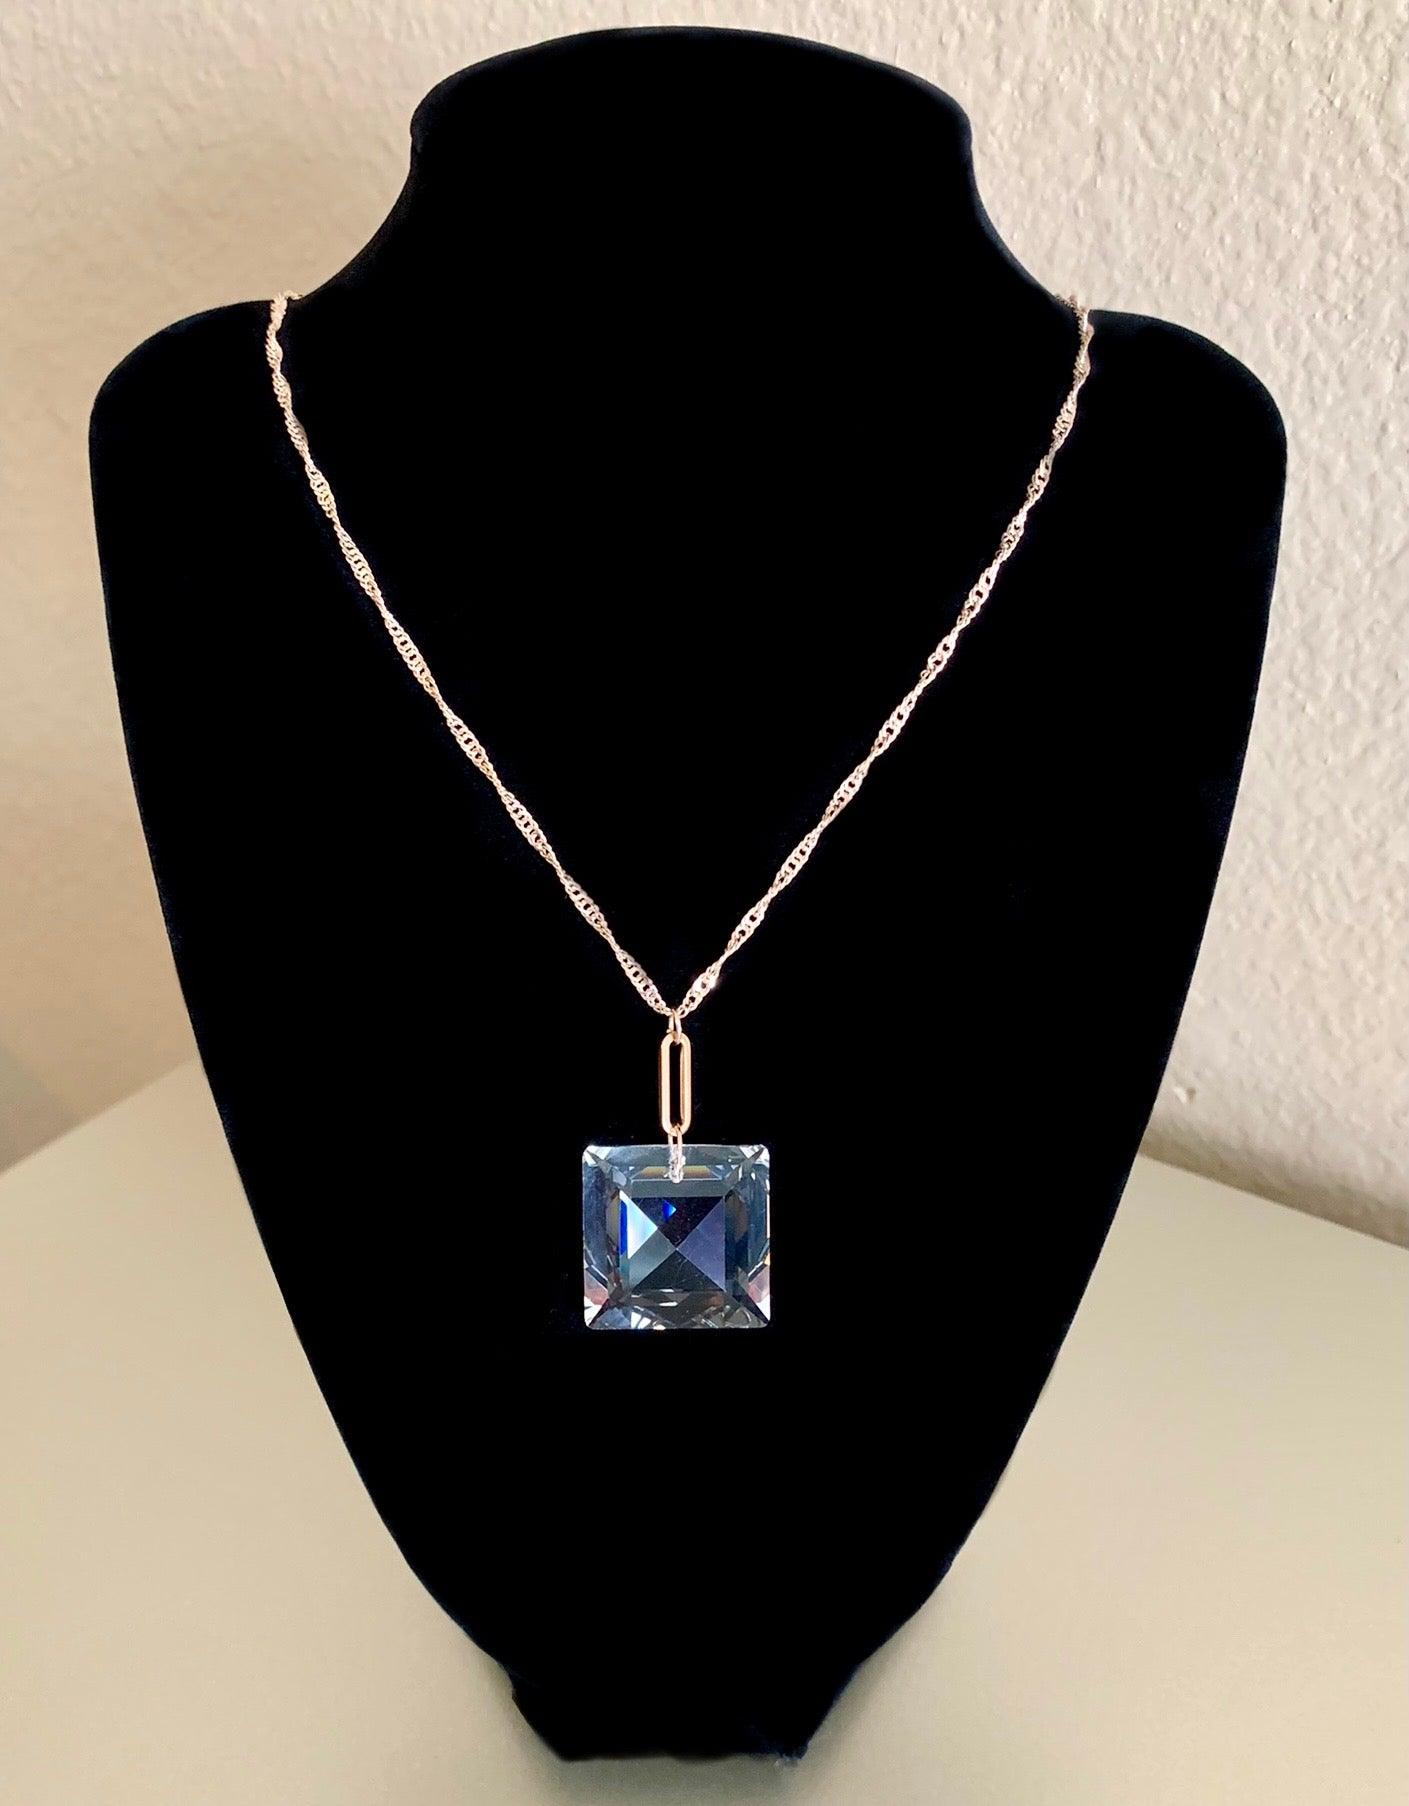 🔴Sold🔴 “Crystal Clear” Square cut Crystal on Rose Gold Necklace - Born Mystics